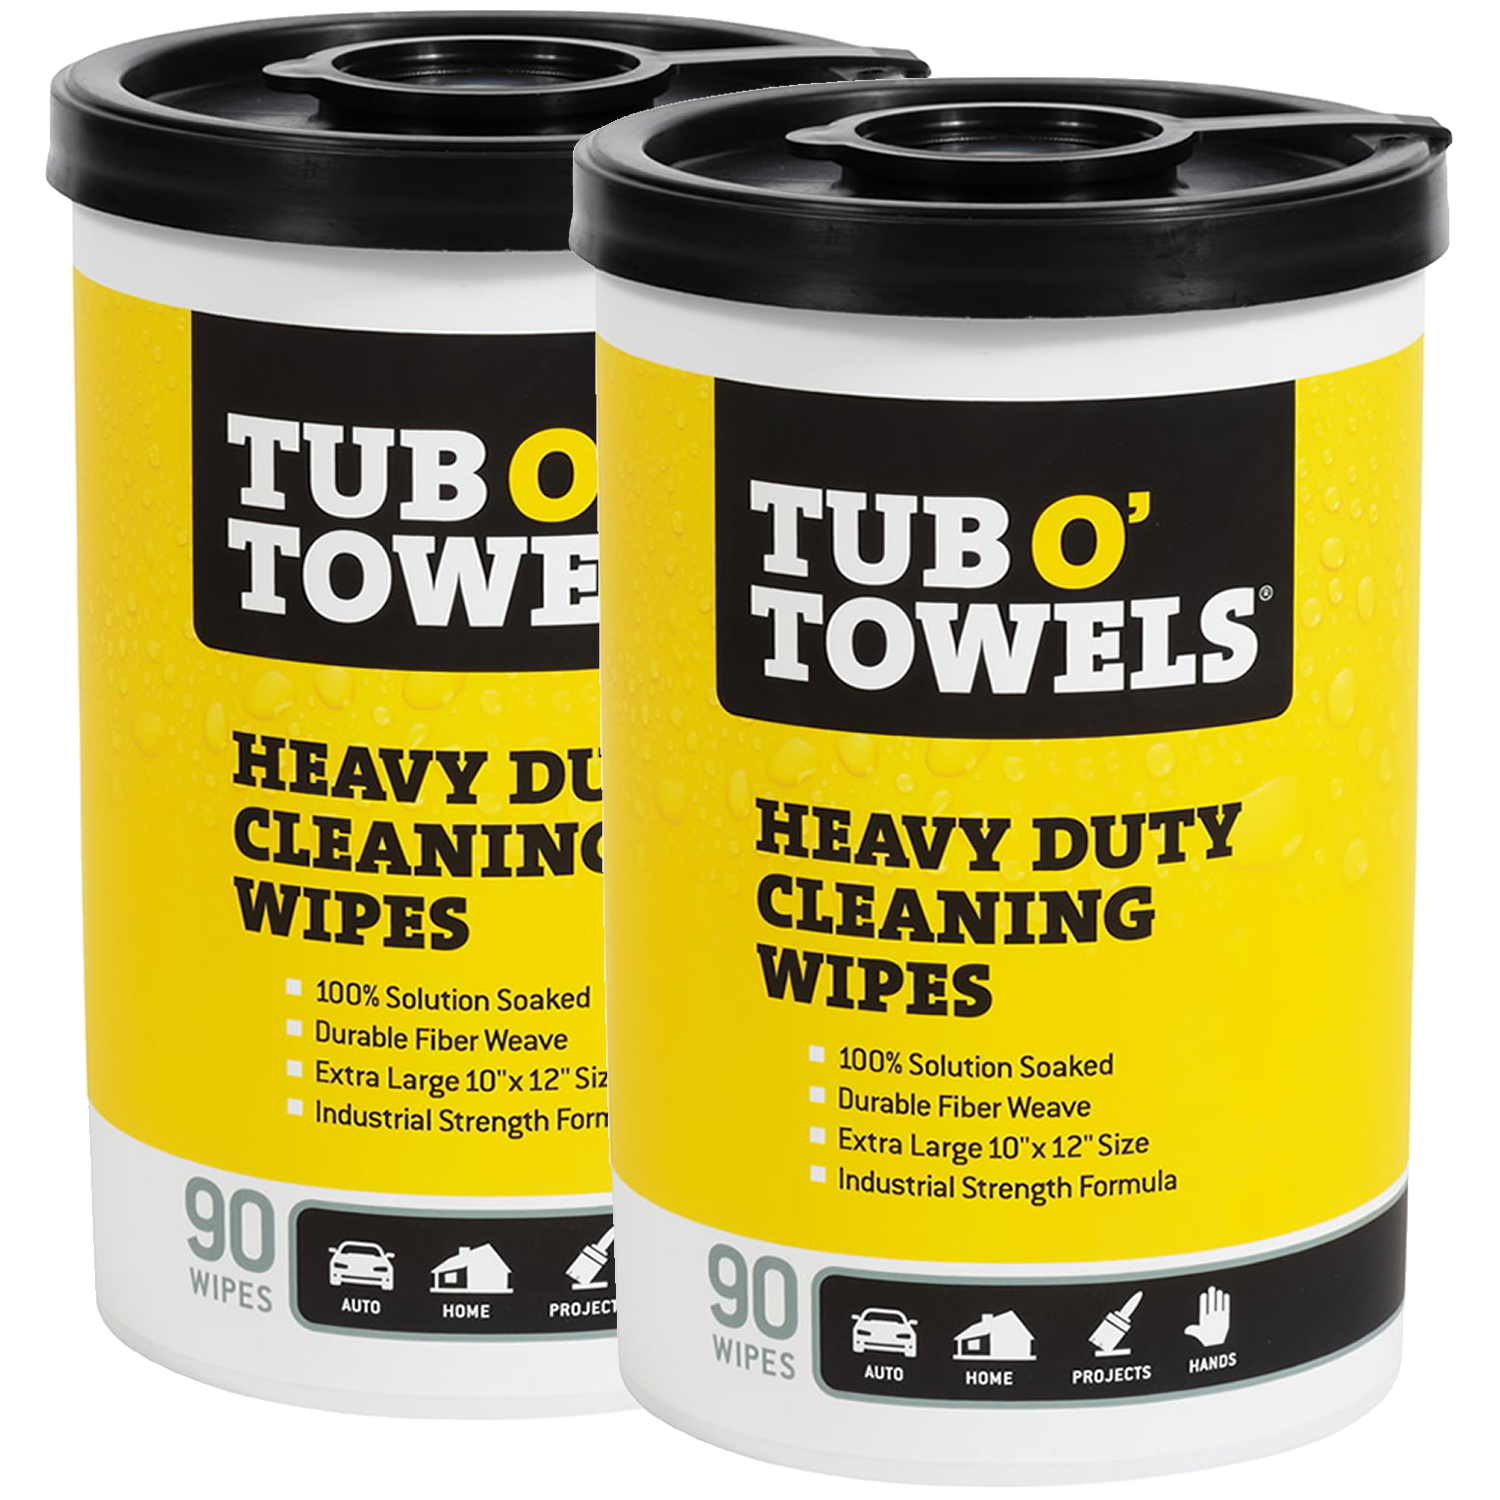 Disposable Cleaning Wipes & Cleaning Supplies for Thousands of Uses – Tub O'  Towels